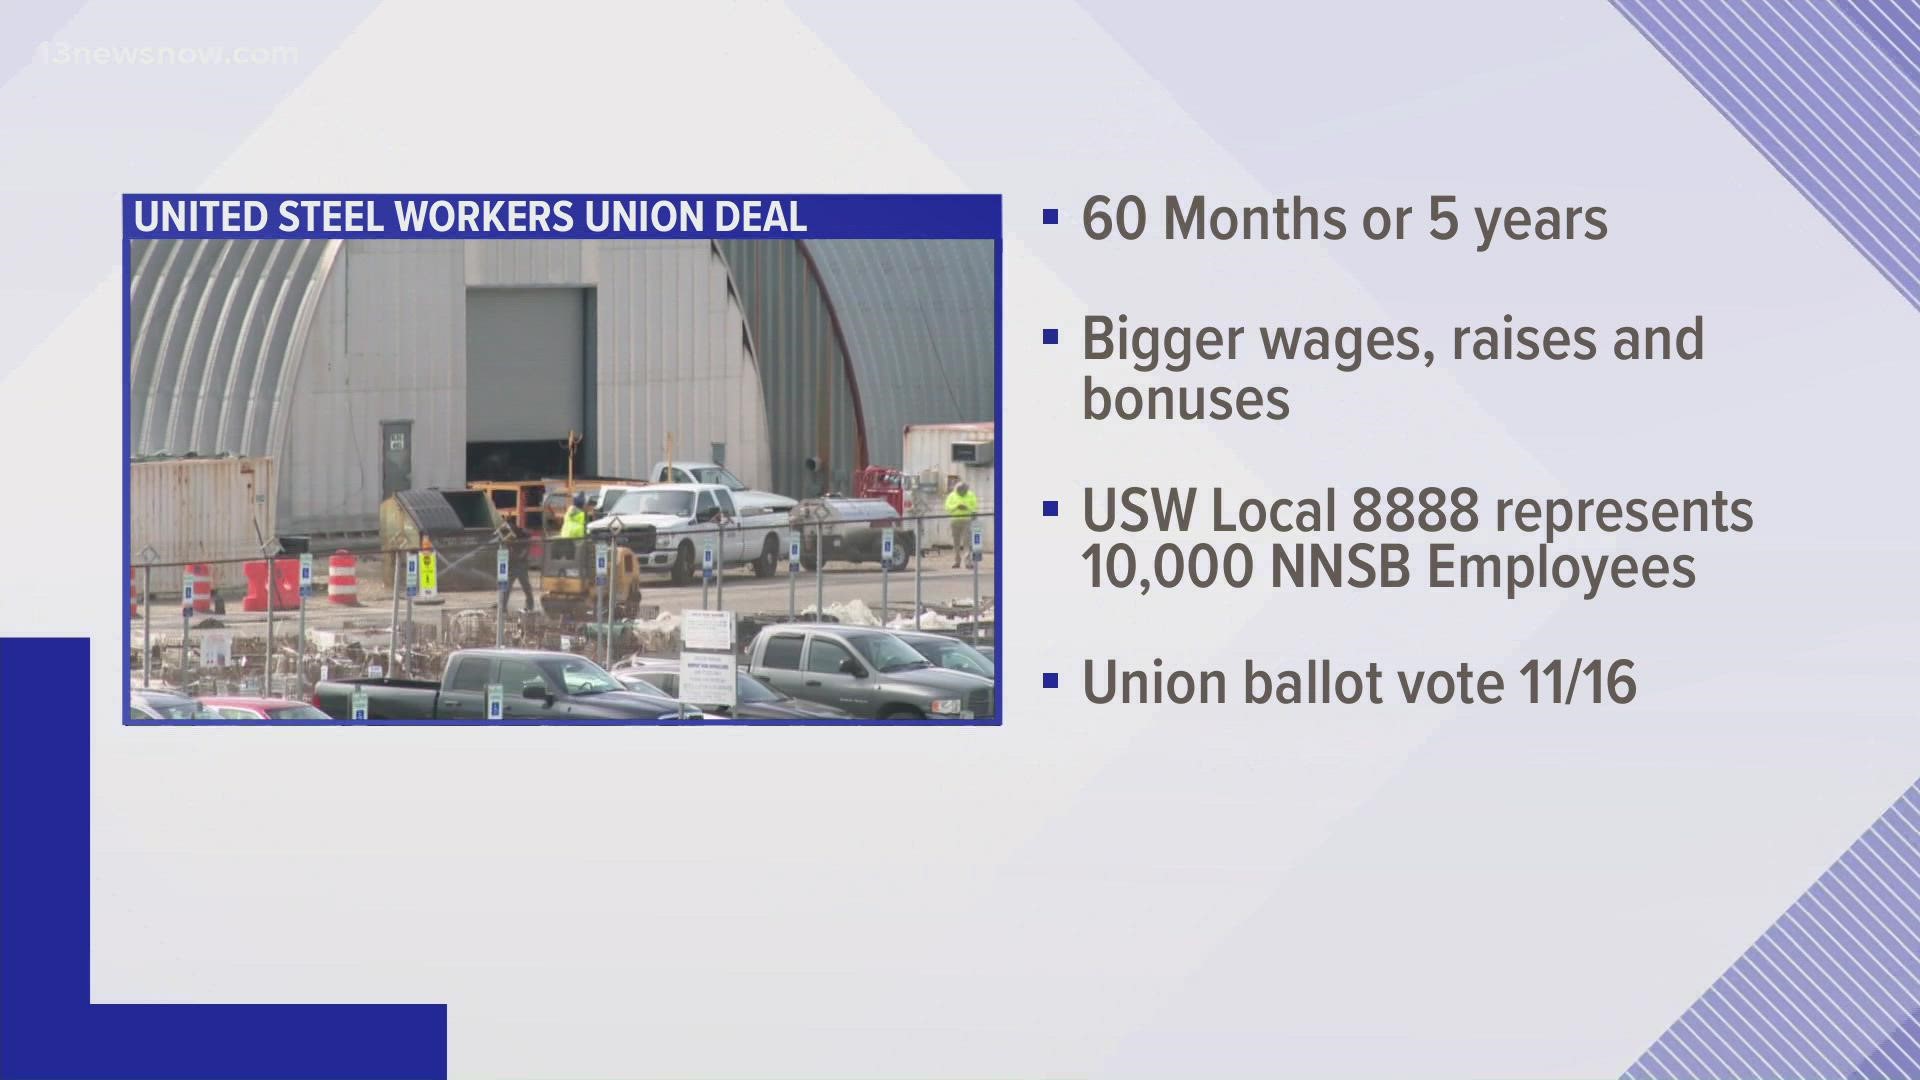 Union members will vote on the 5-year deal on Tuesday.